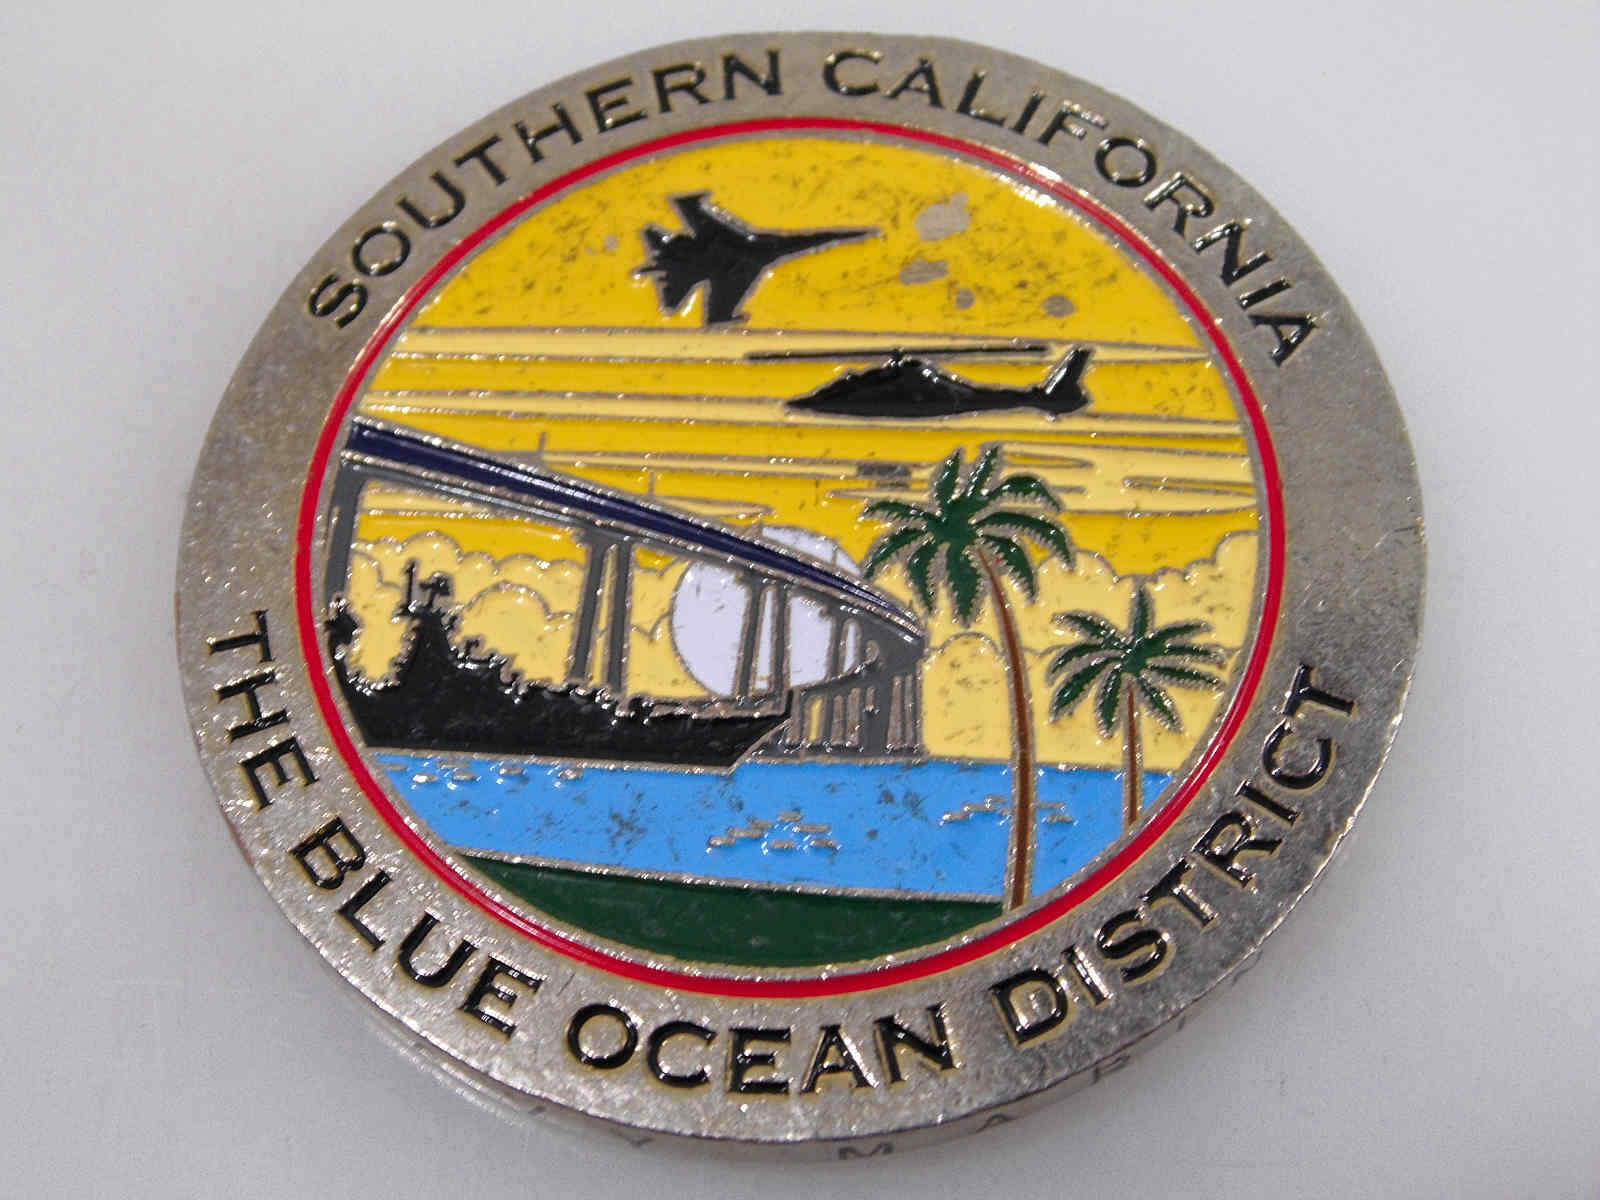 SOUTHERN CALIFORNIA BLUE OCEAN DISTRICT FIRST COMMAND CHALLENGE COIN